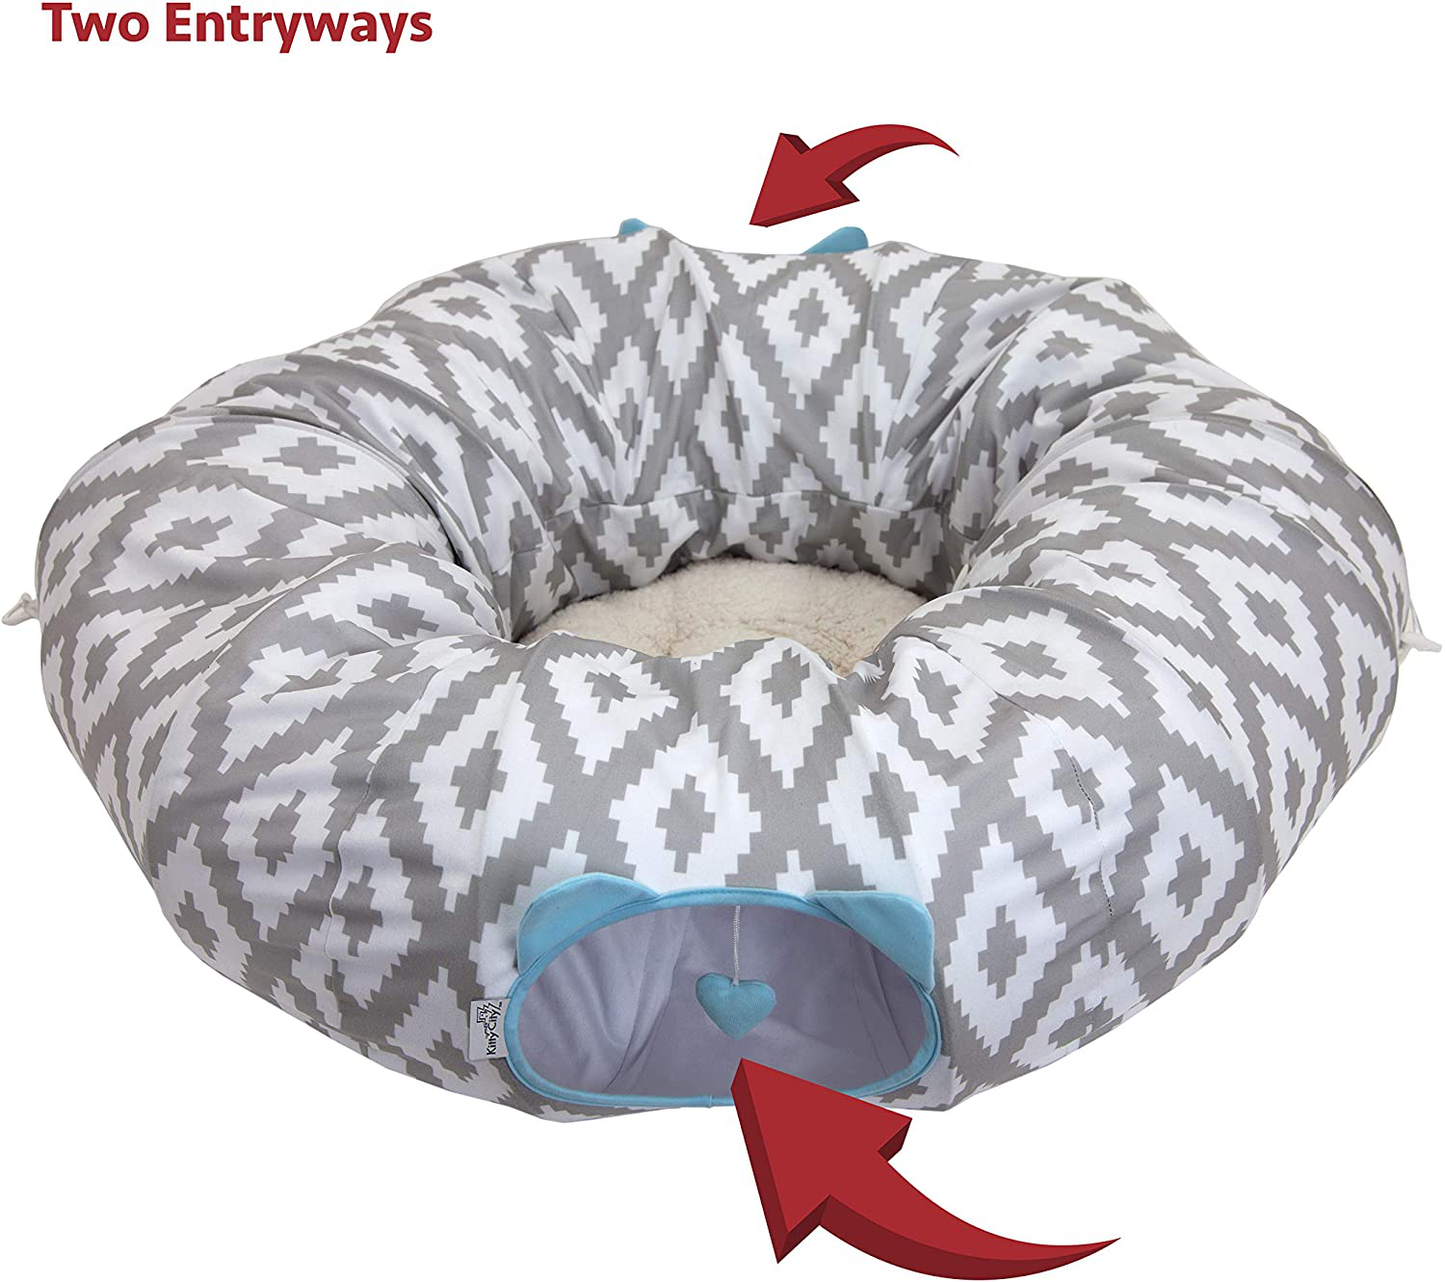 Kitty City Large Cat Tunnel Bed, Cat Bed, Pop up Bed, Cat Toys